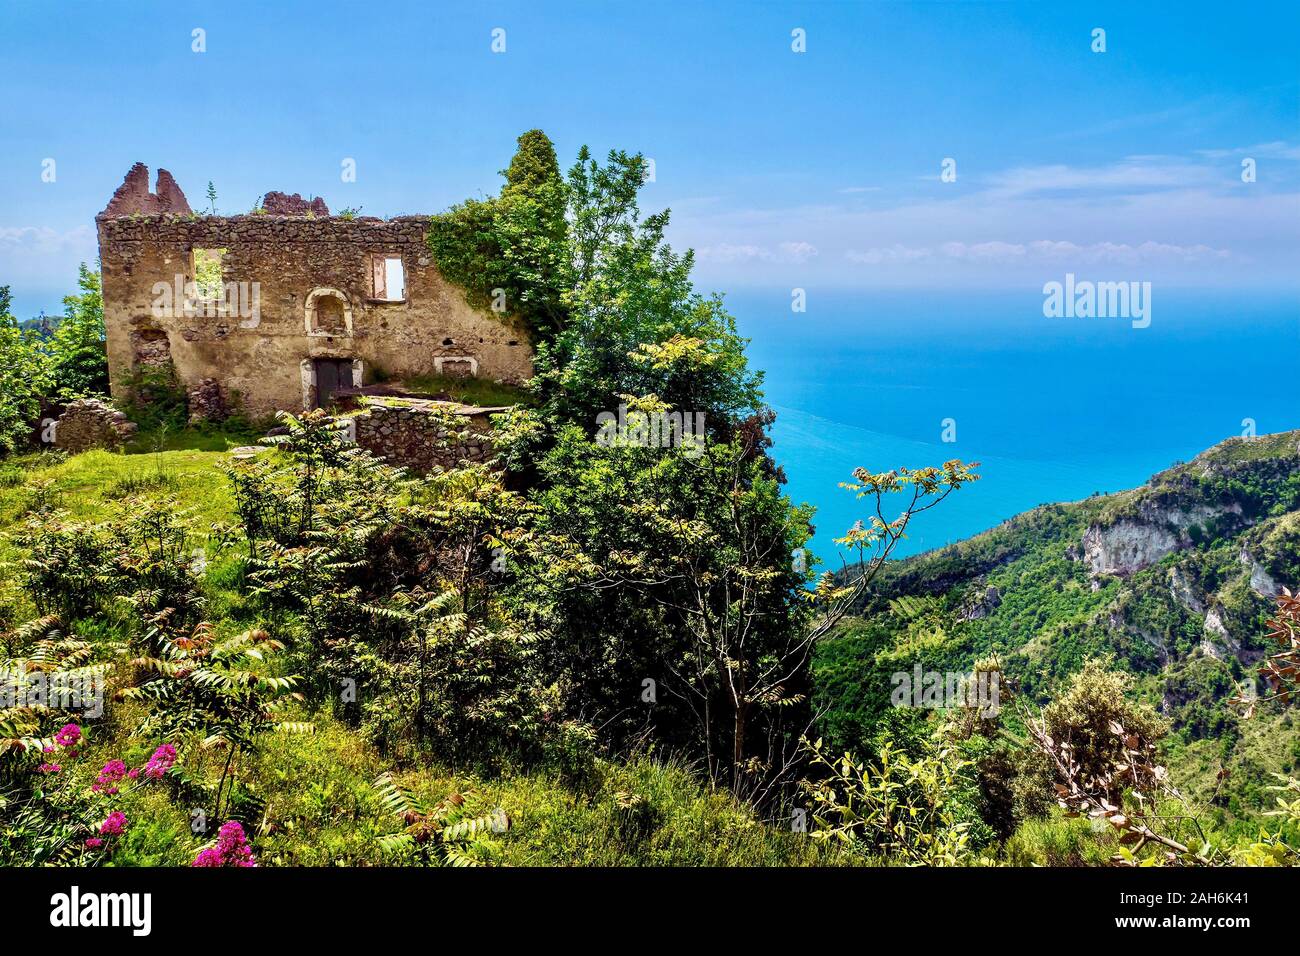 Changing times. An old traditional home with a spectacular view of the sea on the Italian Amalfi Coast is now abandoned and decaying. Stock Photo